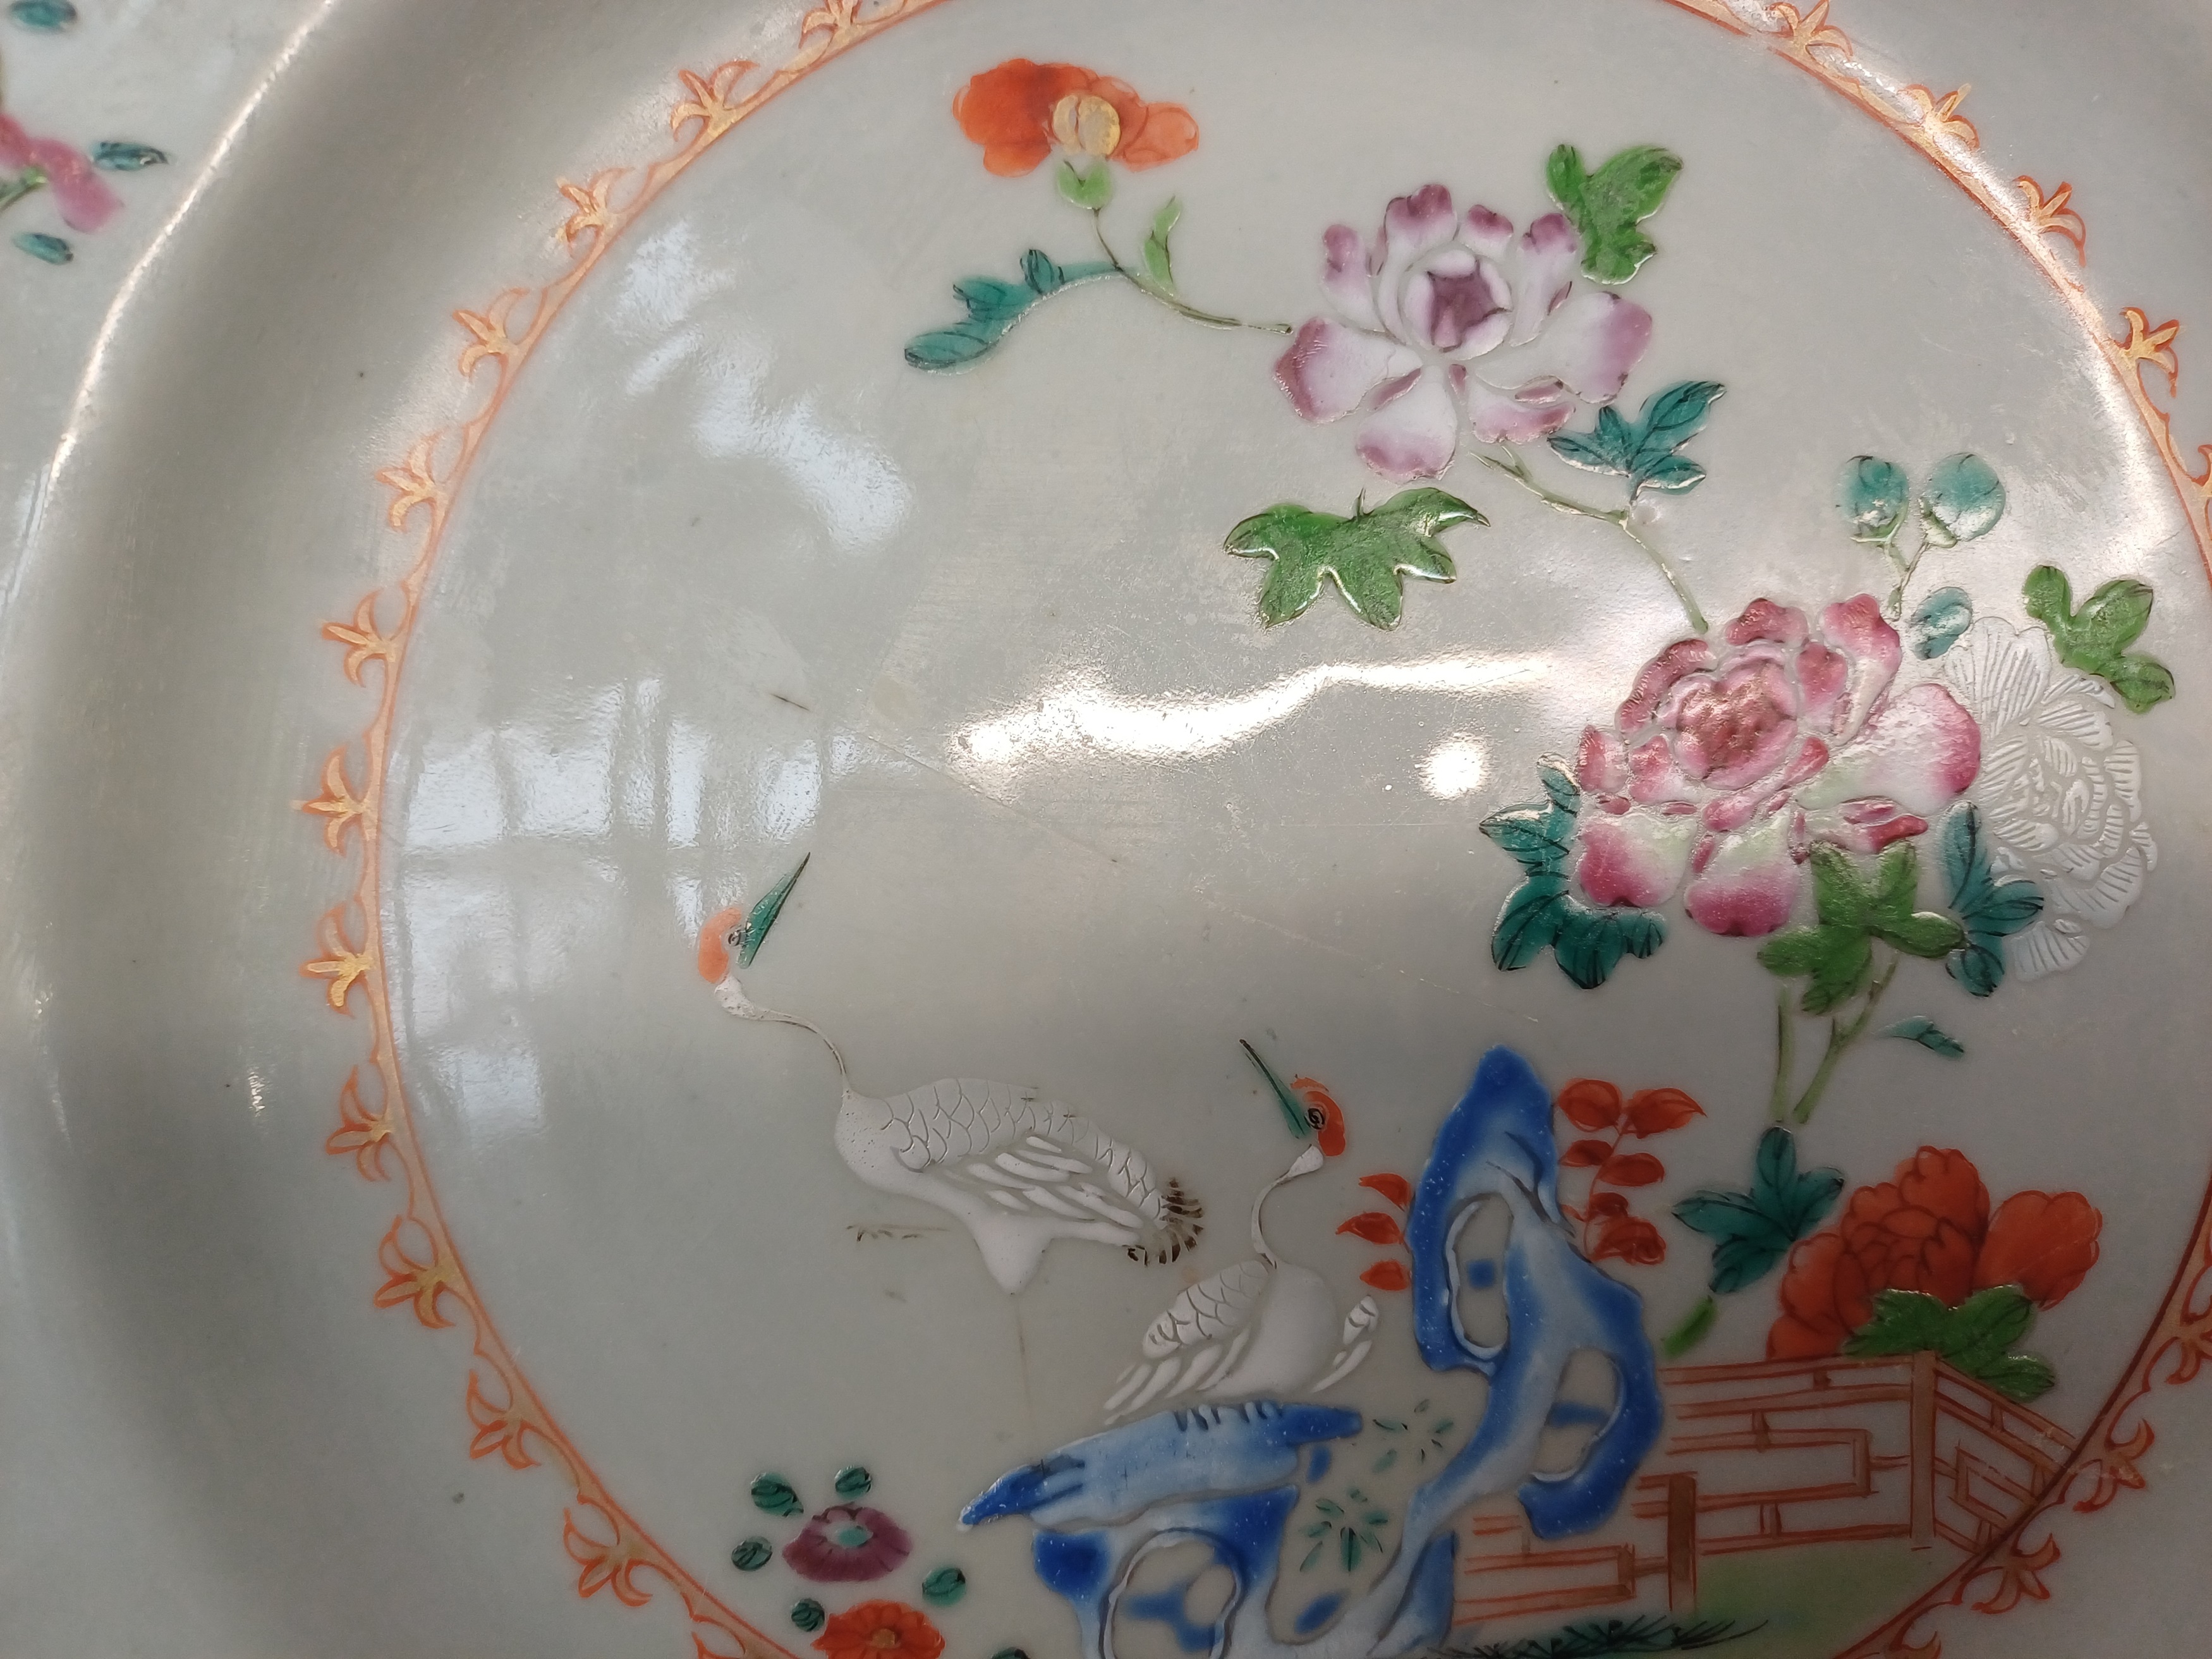 TWO CHINESE EXPORT FAMILLE-ROSE 'CRANES AND BLOSSOMS' DISHES 清十八世紀 外銷粉彩牡丹鶴紋盤兩件 - Image 6 of 15